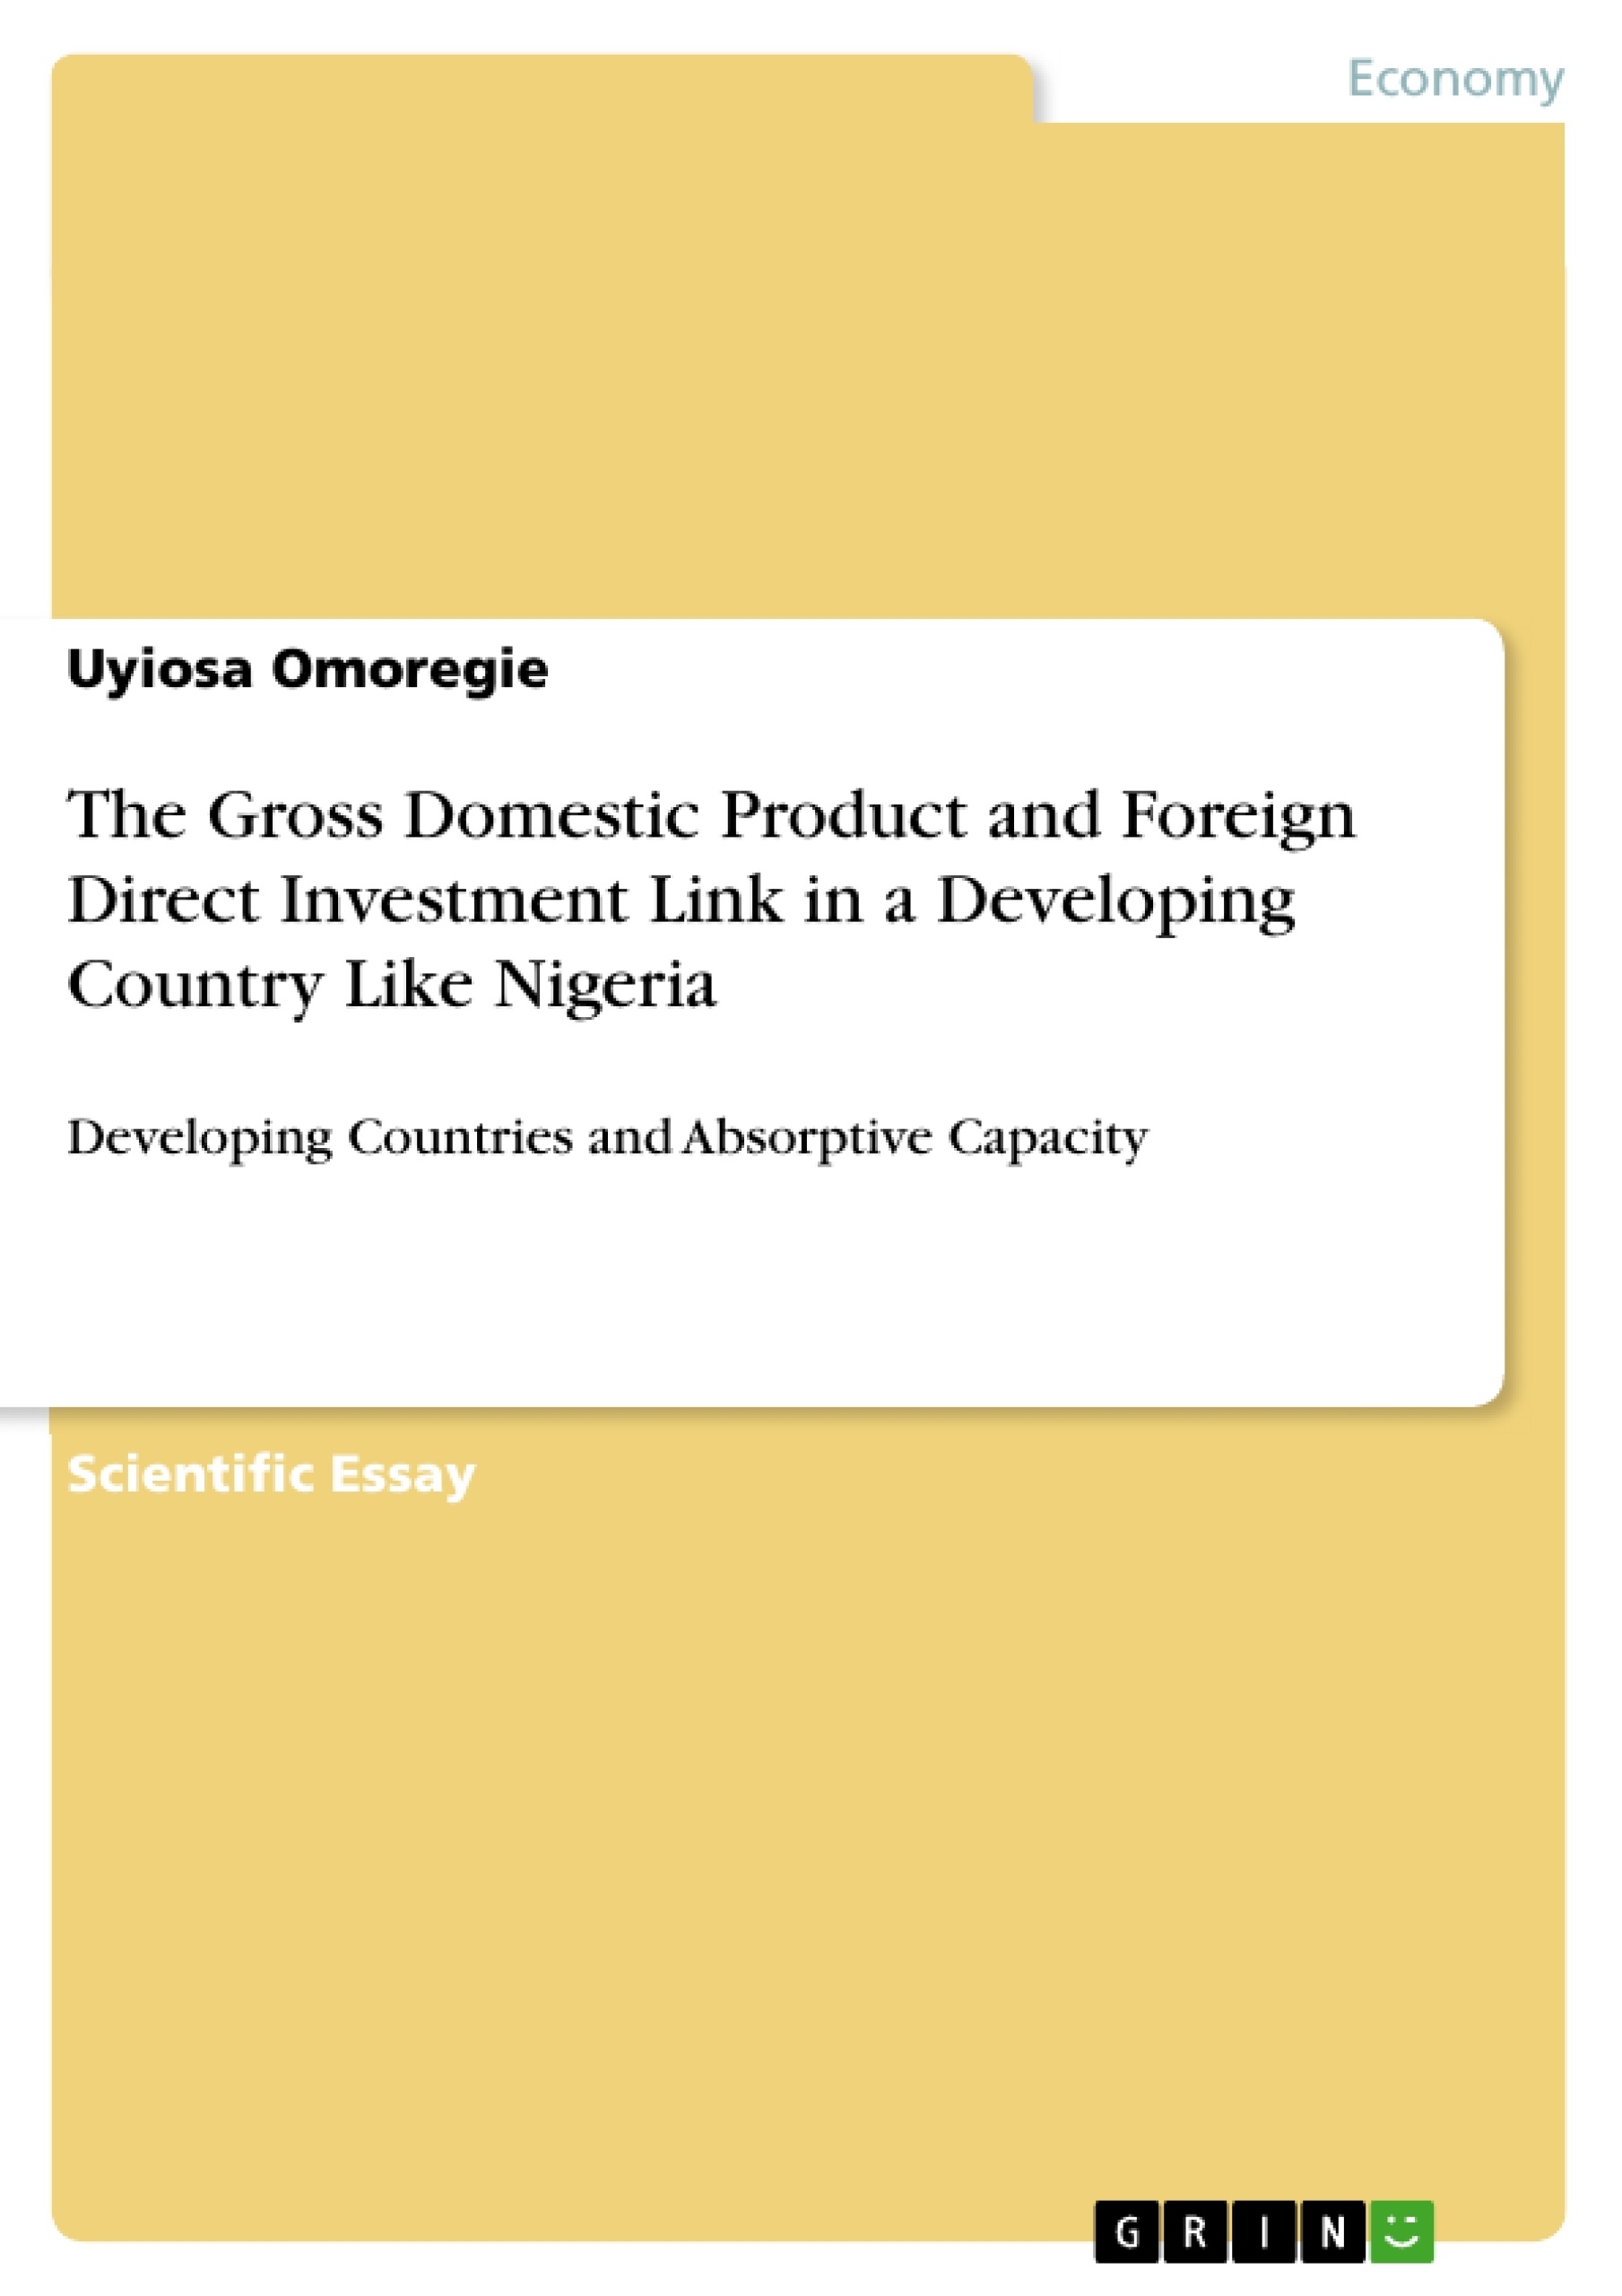 Título: The Gross Domestic Product and Foreign Direct Investment Link in a Developing Country Like Nigeria